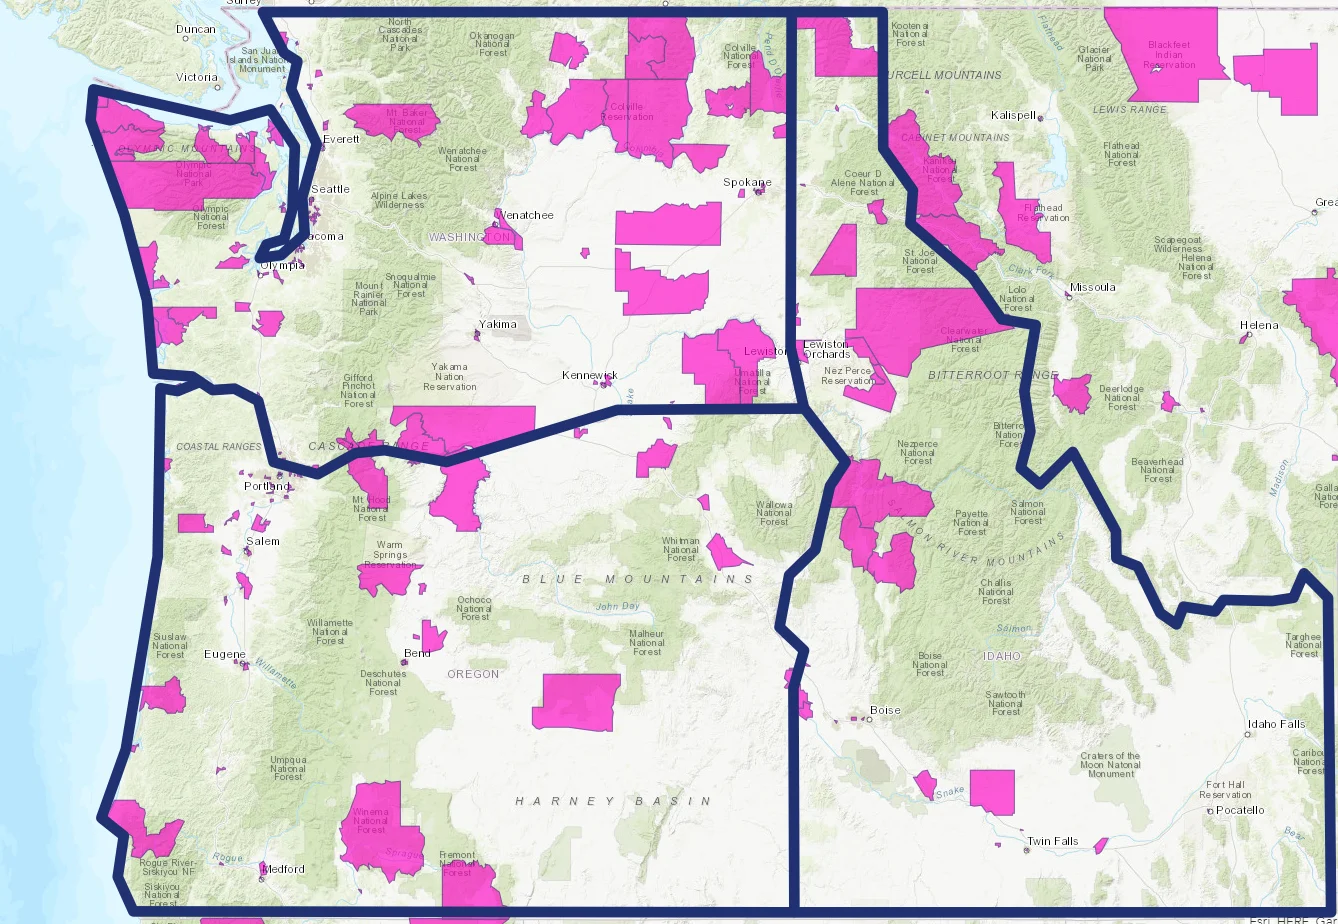 opportunity zones can be found throughout the Pacific Northwest